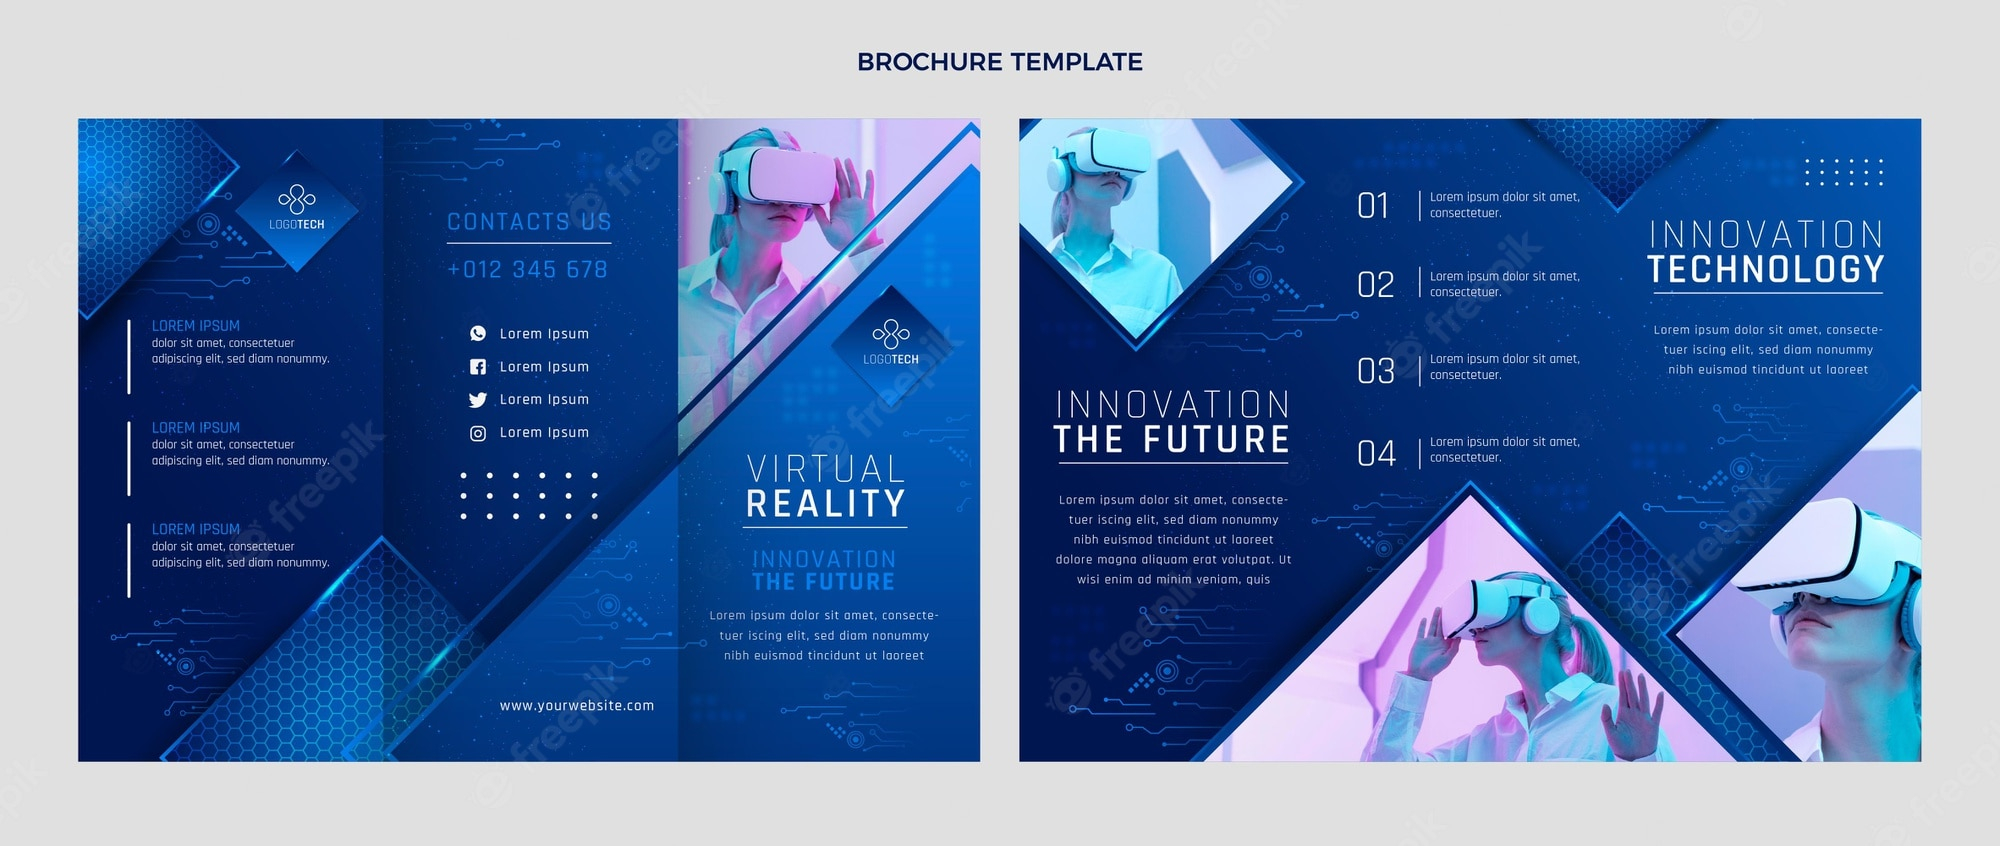 Technology brochure template Images  Free Vectors, Stock Photos & PSD Throughout Technical Brochure Template